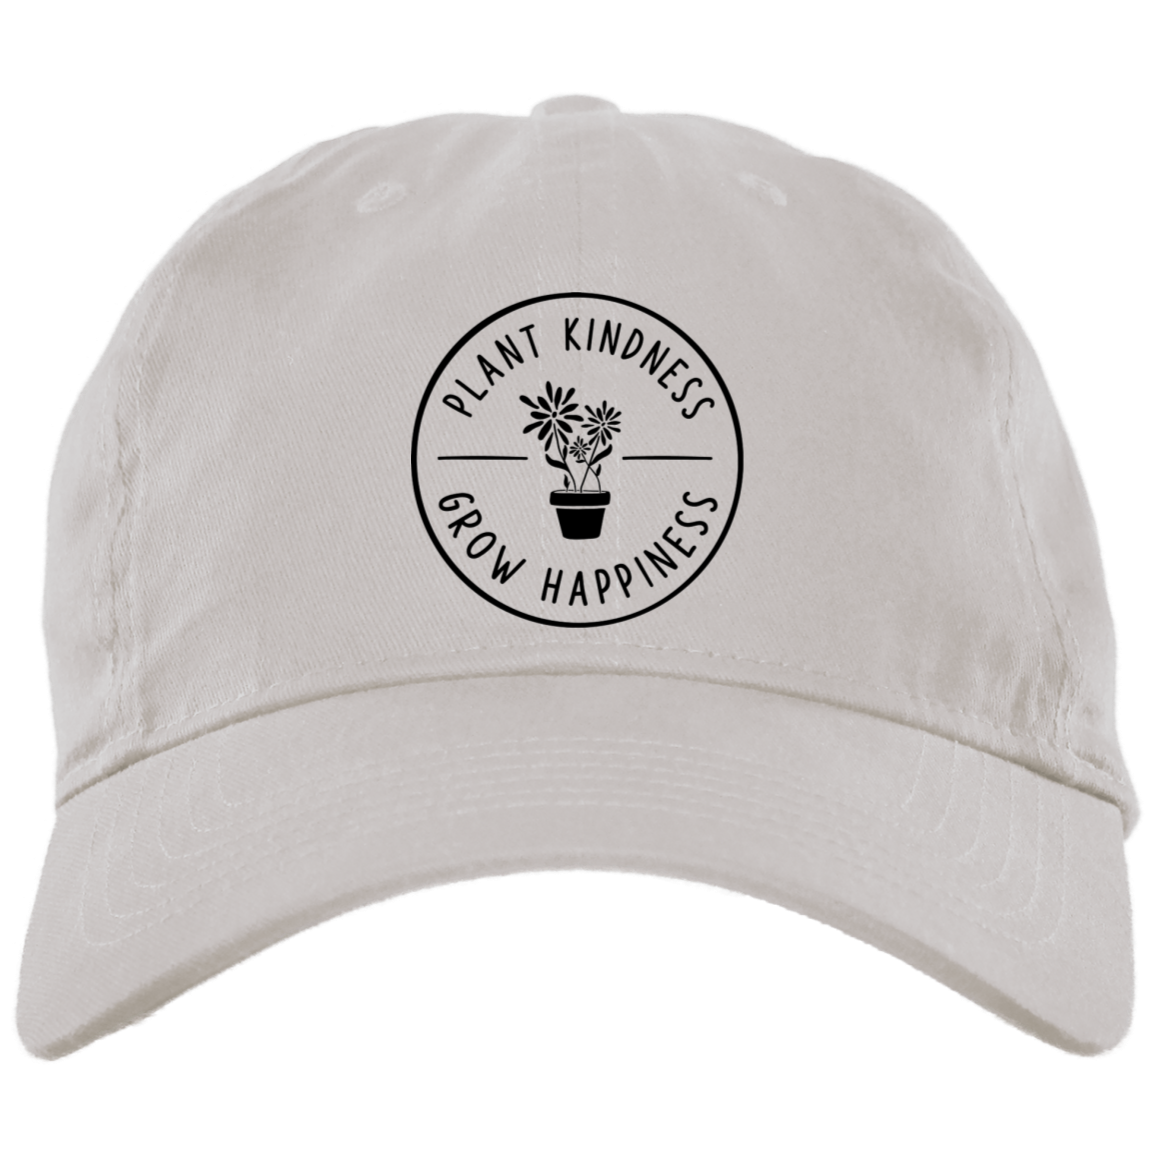 Plant Kindness Grow Happiness  Embroidered Brushed Twill Unstructured Dad Cap